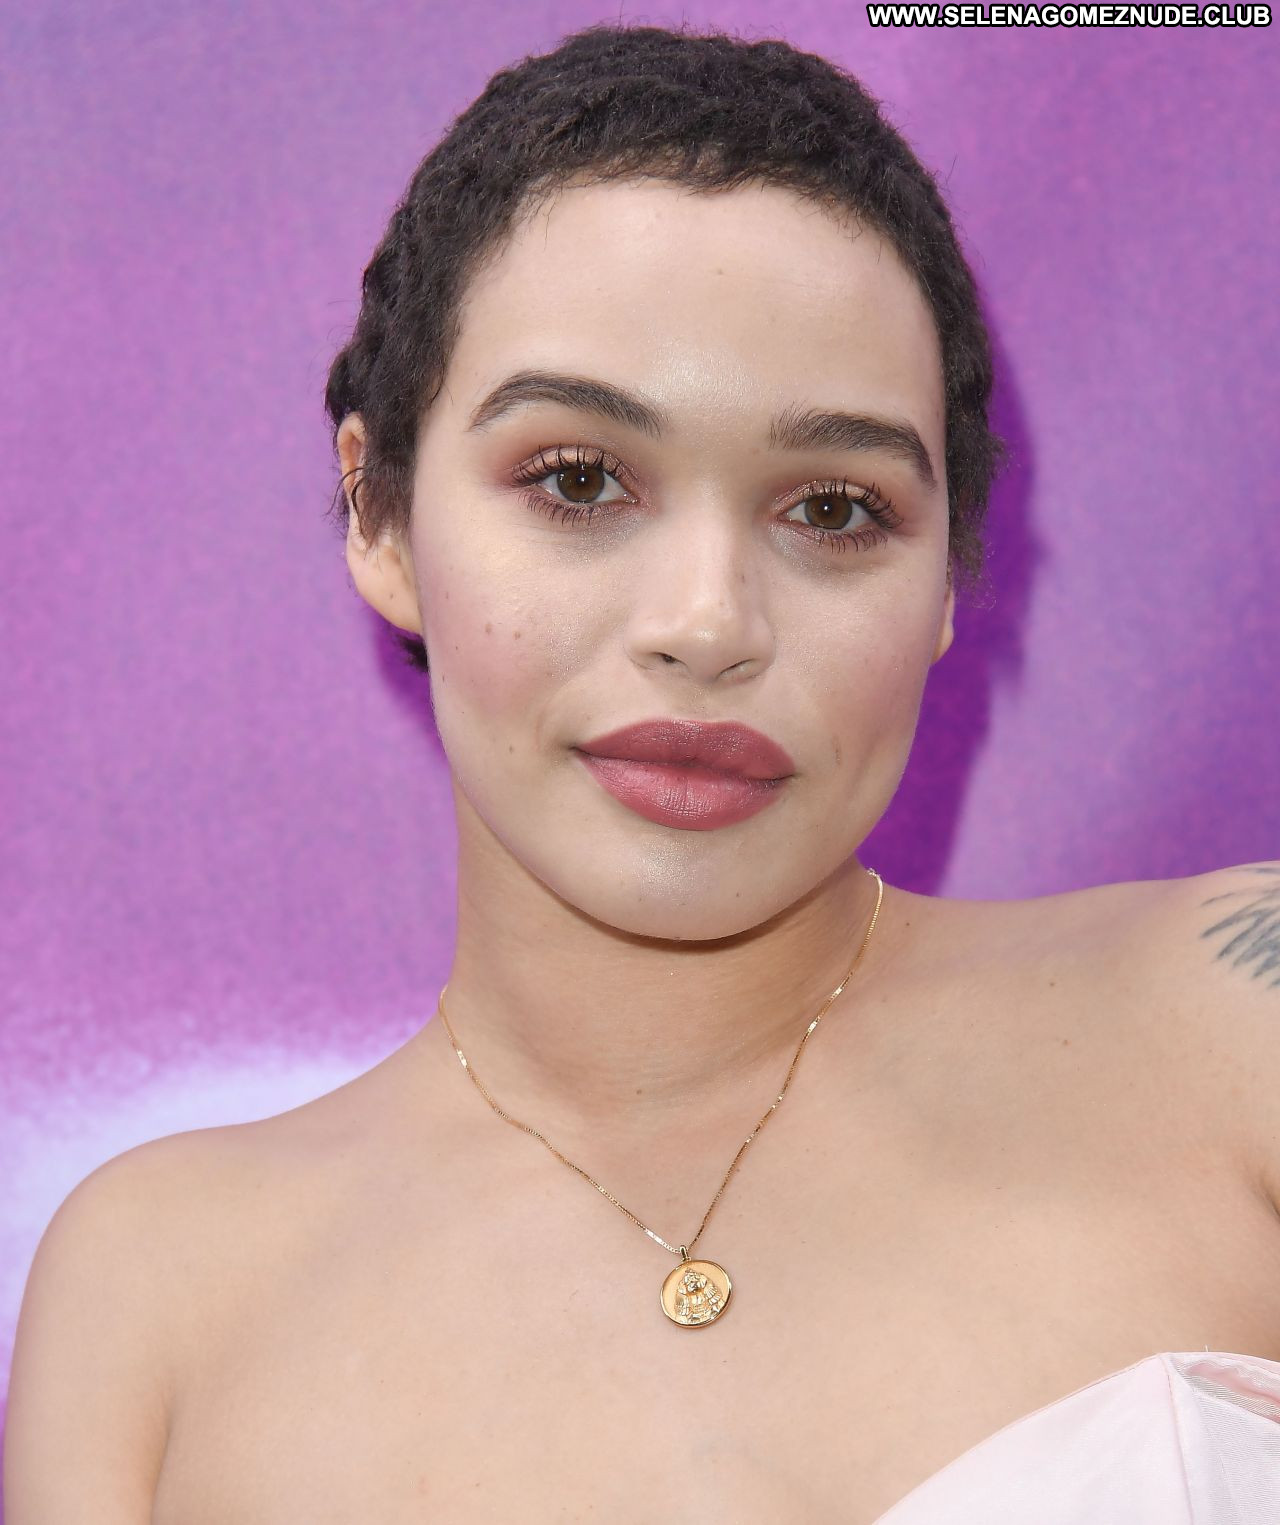 Cleopatra coleman naked